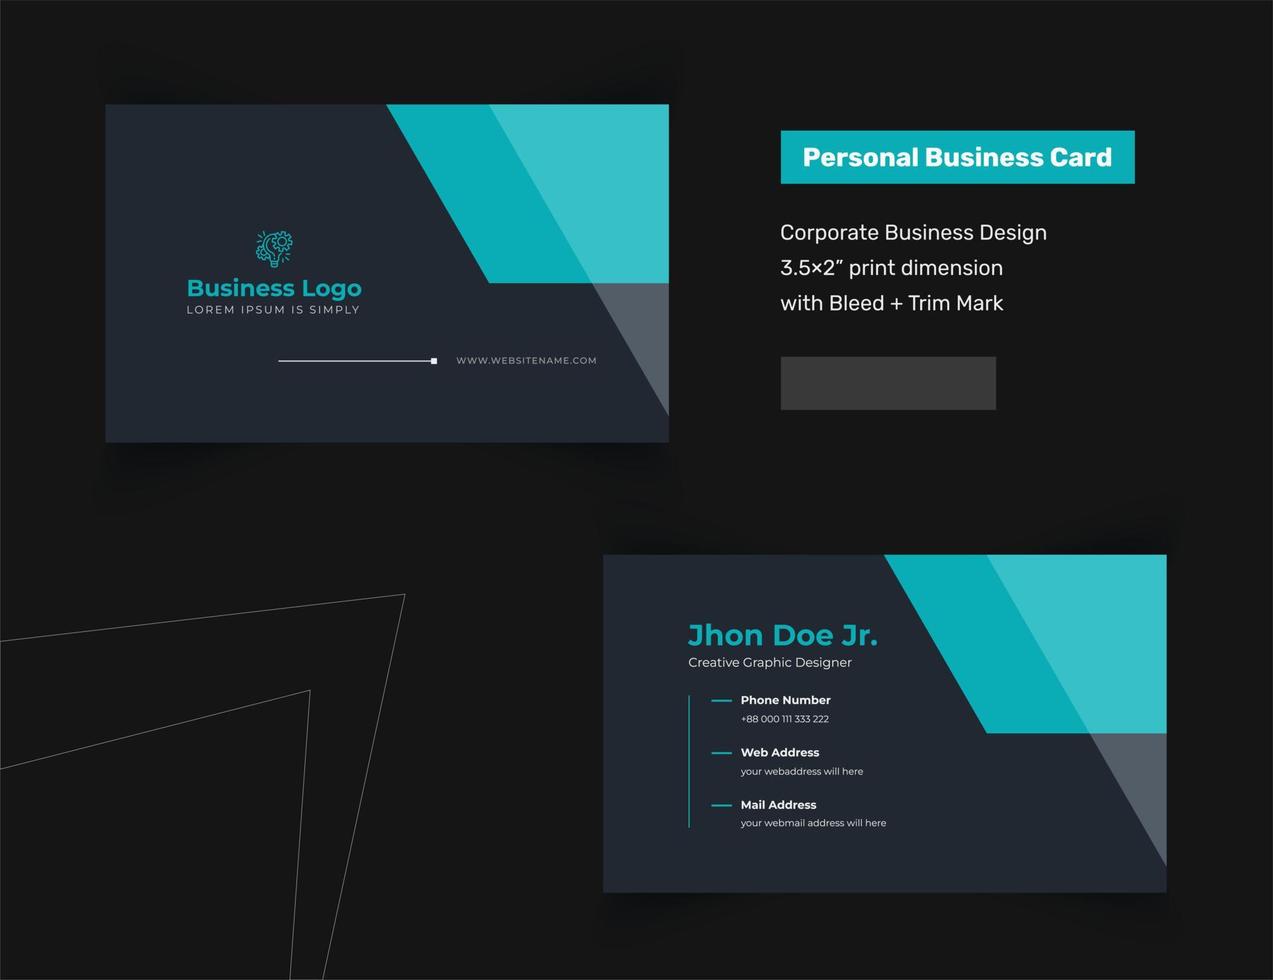 Business Card Template For Digital DJ, Consulting Engineer, Architecture, Photographer, Designer vector